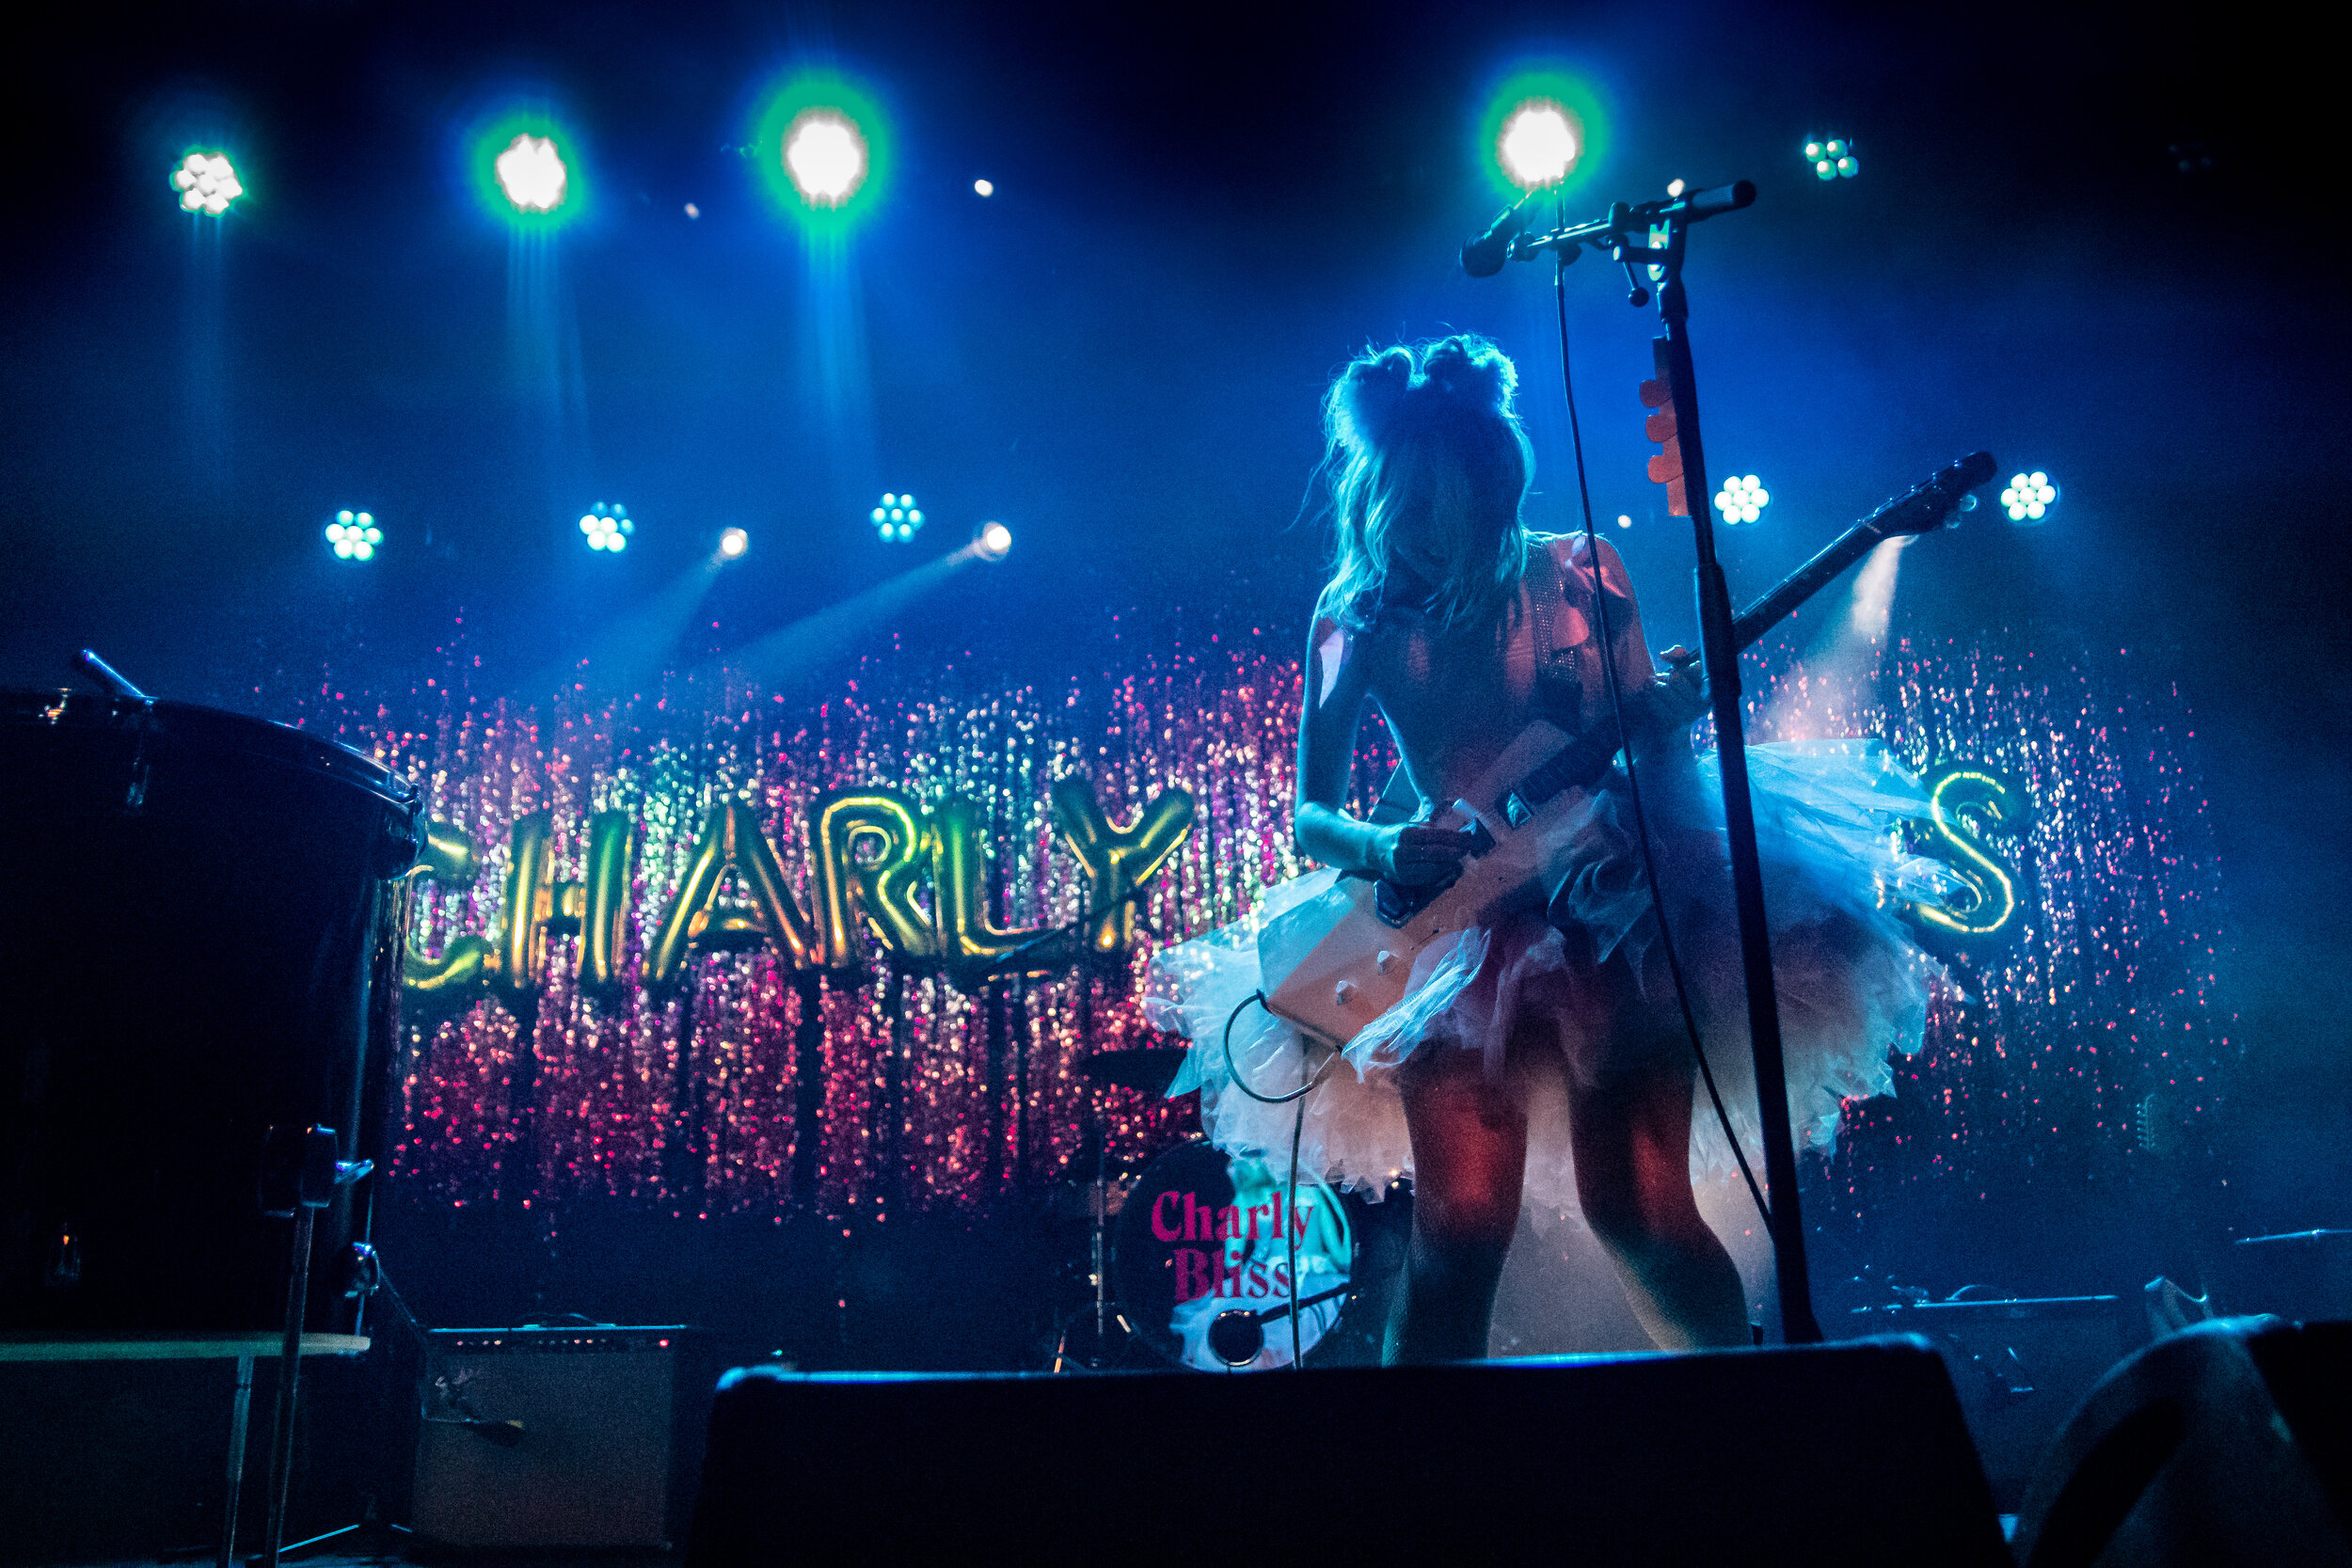 Charly Bliss Color.jpg